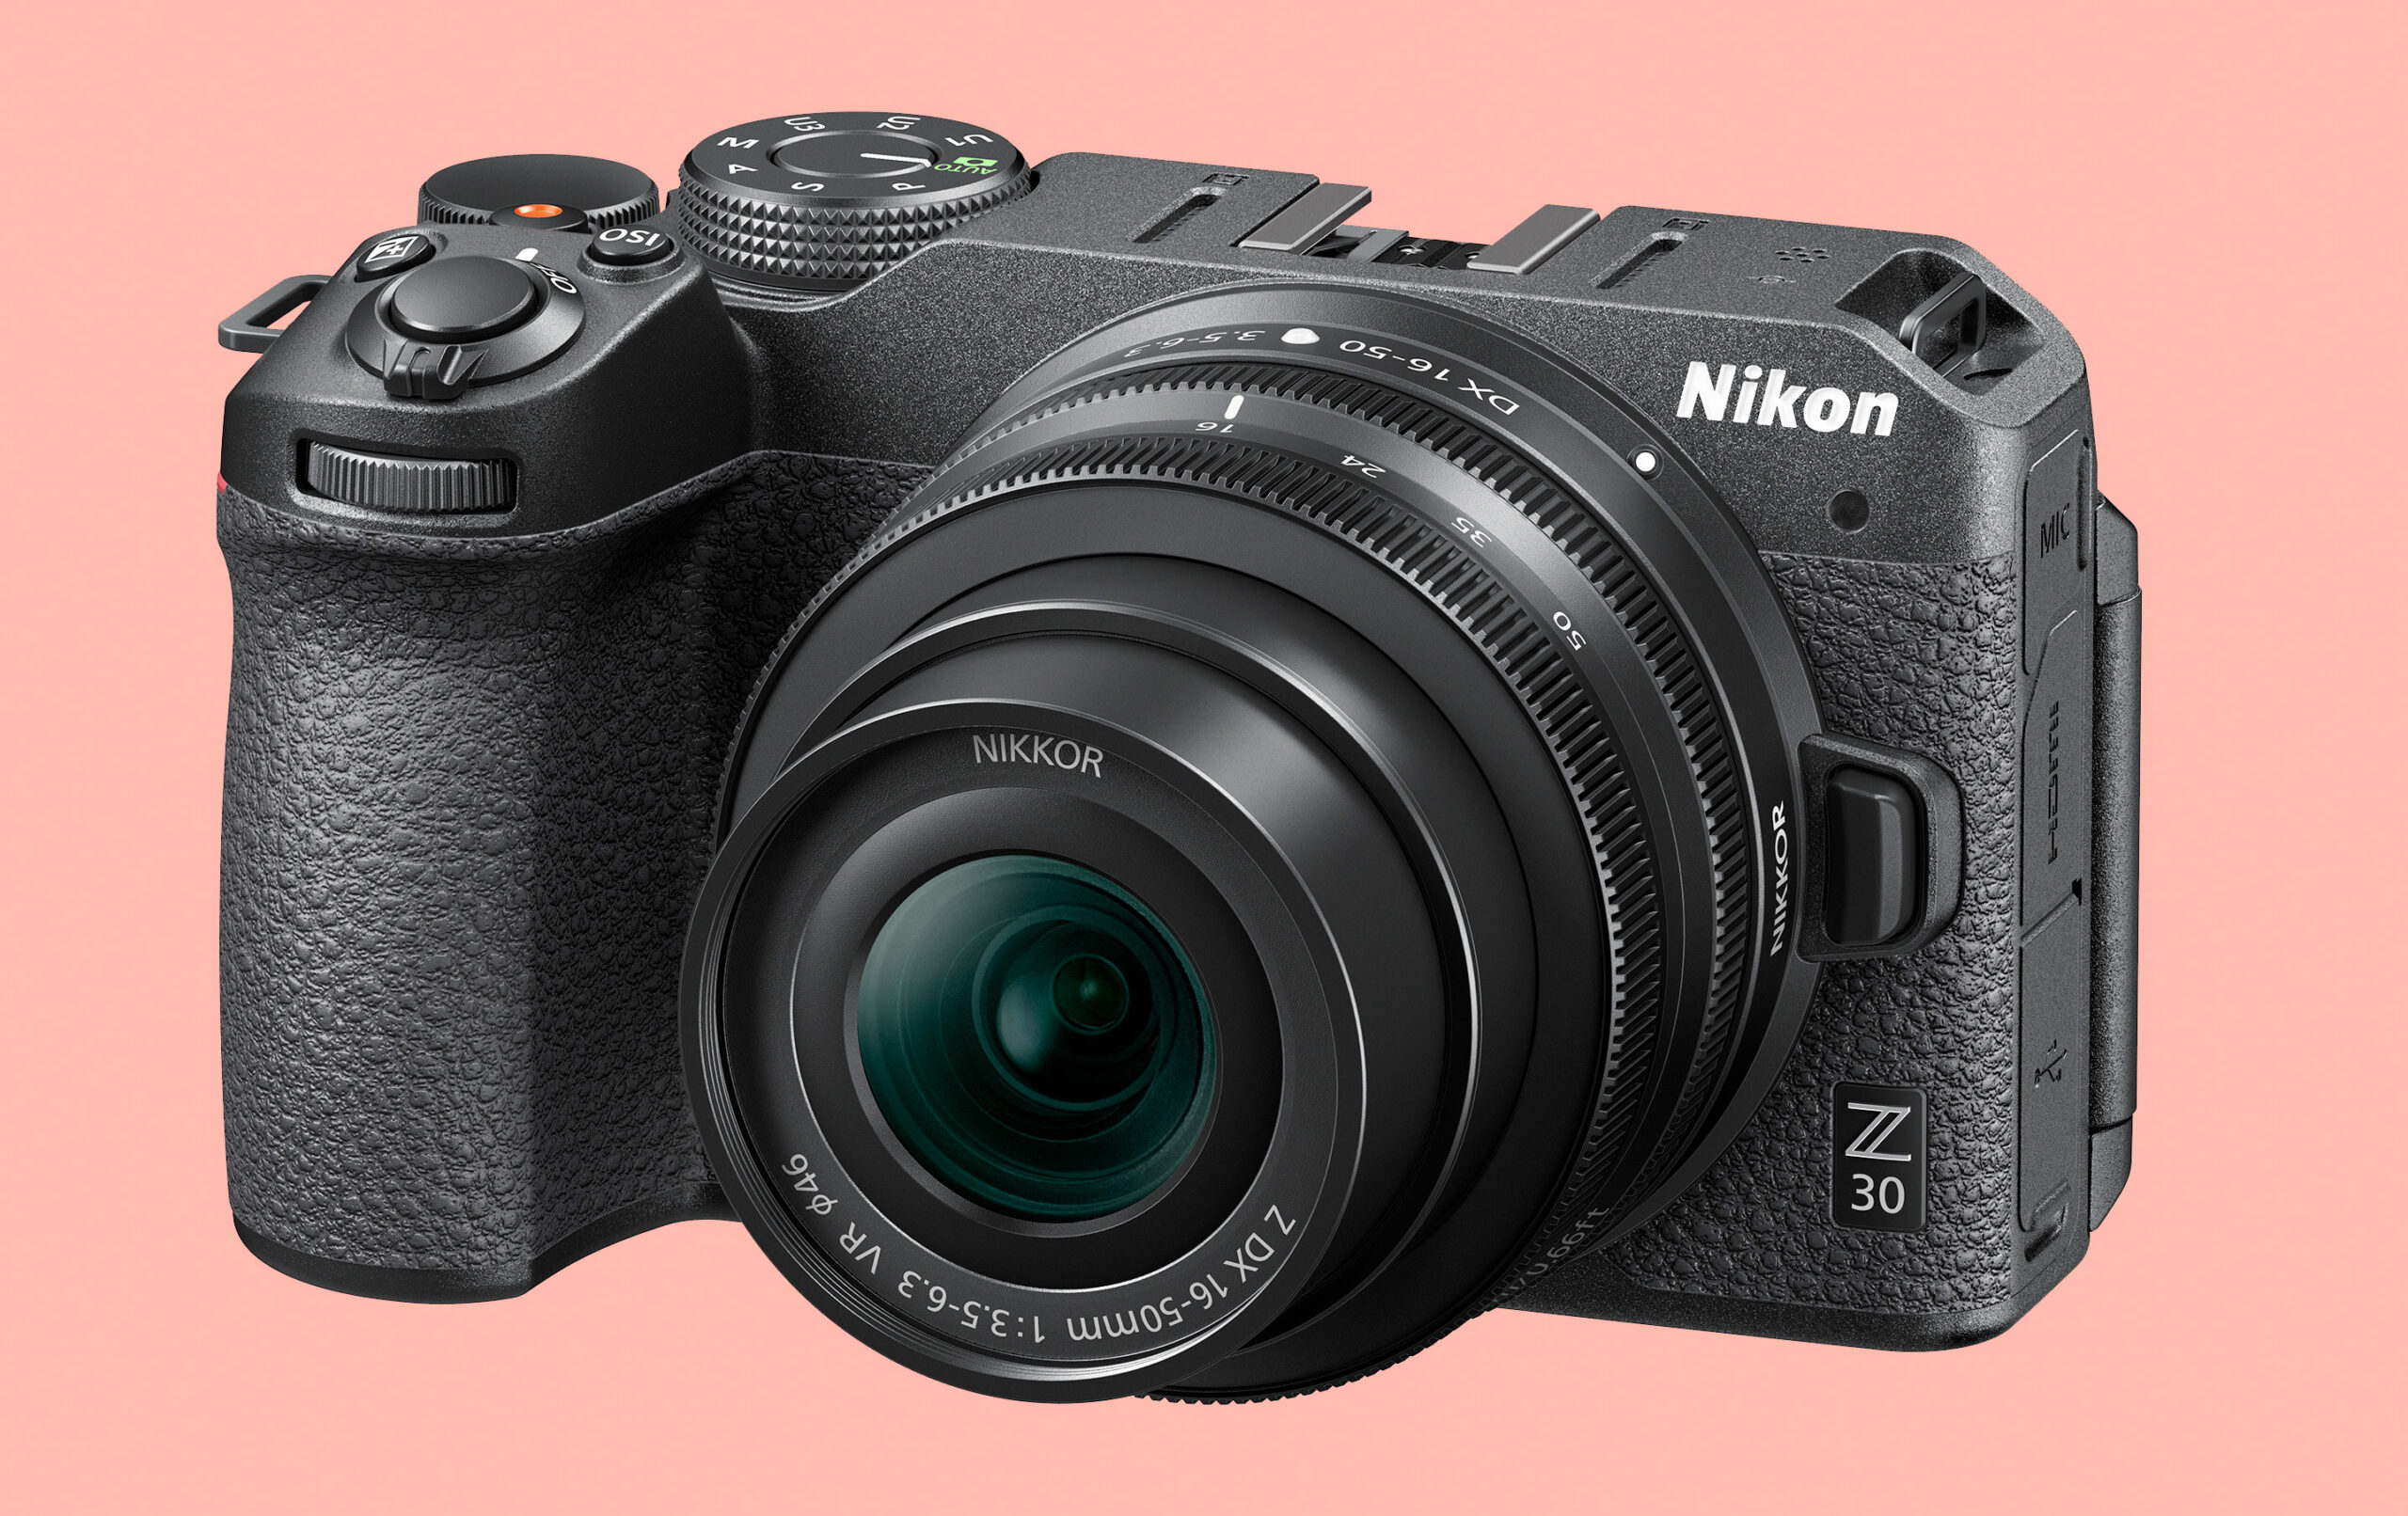 New gear: The Nikon Z30 shoots 4K for less